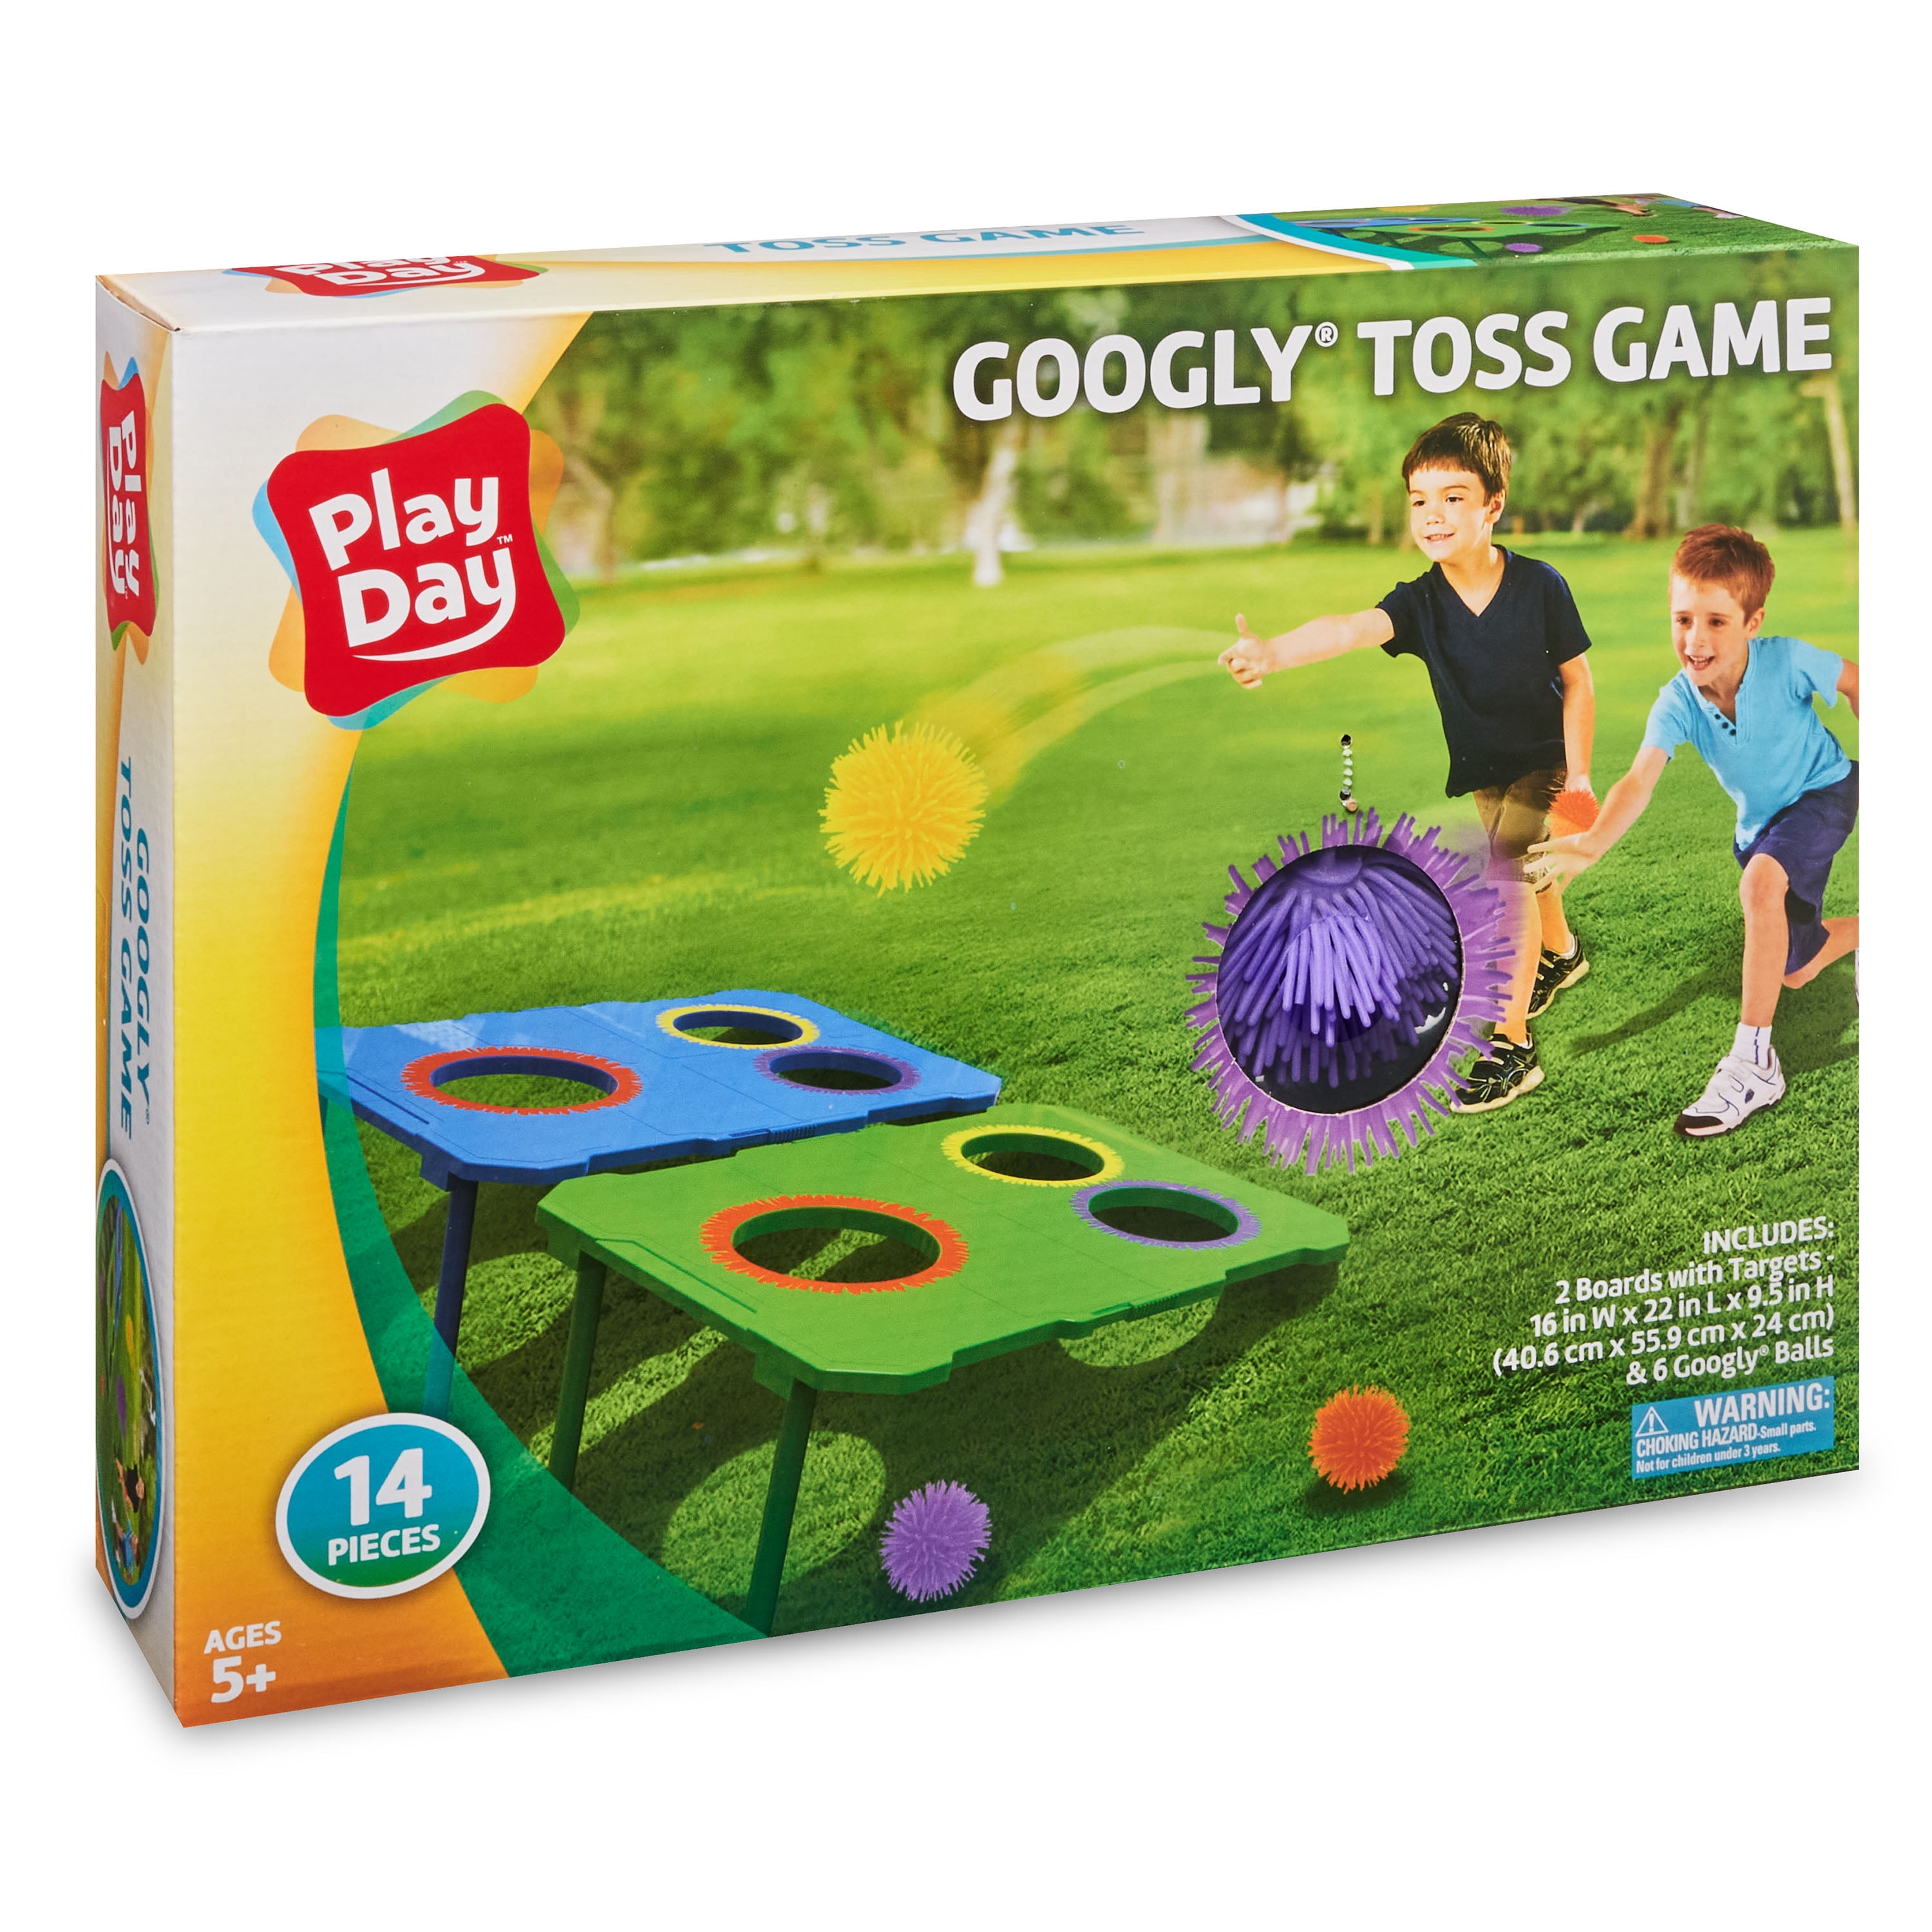 Play Day Wibbly Toss Game Multicolor Family Friendly Corn Hole Play Day 